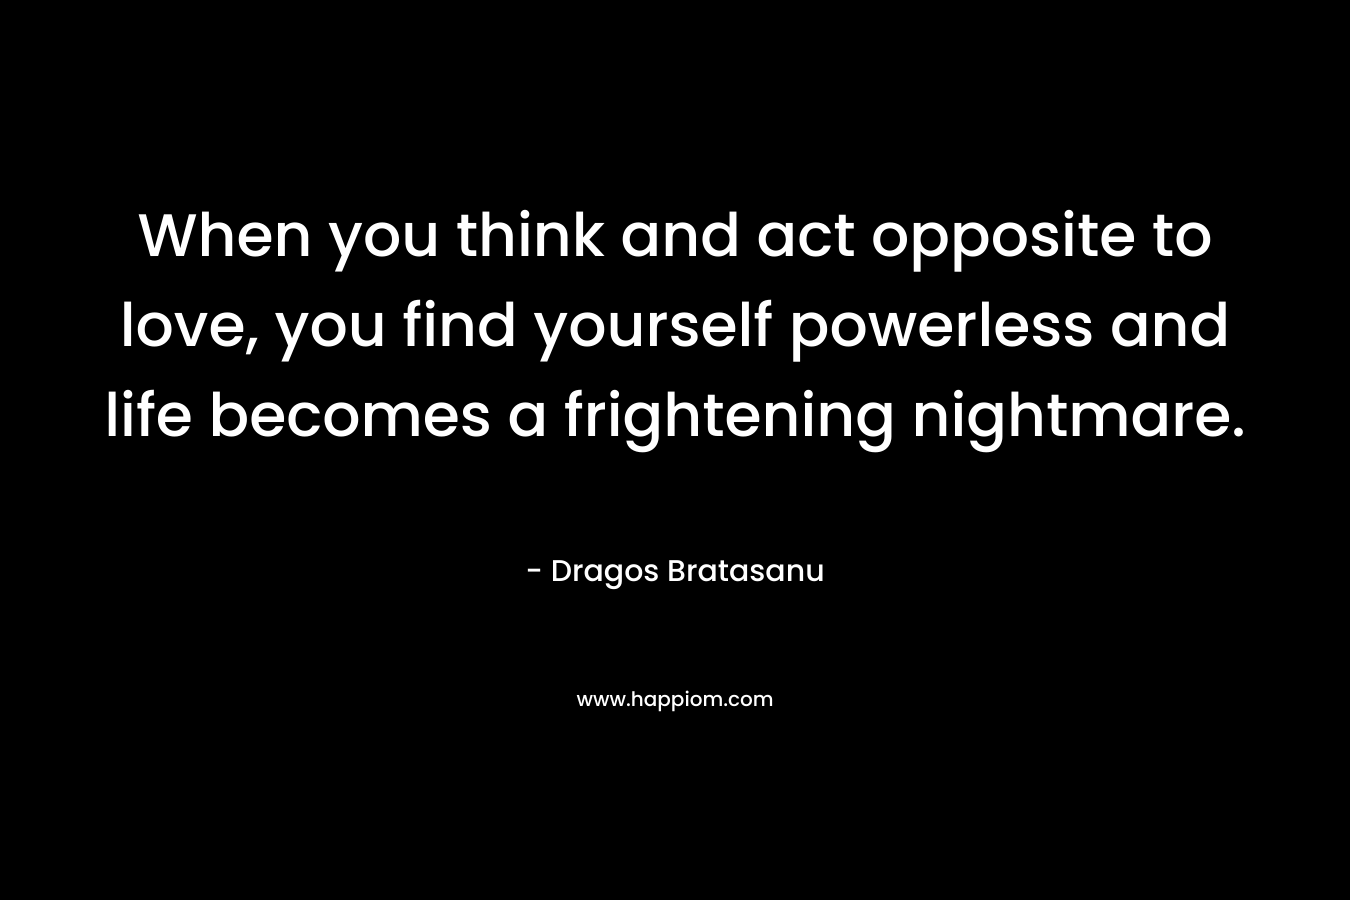 When you think and act opposite to love, you find yourself powerless and life becomes a frightening nightmare. – Dragos Bratasanu